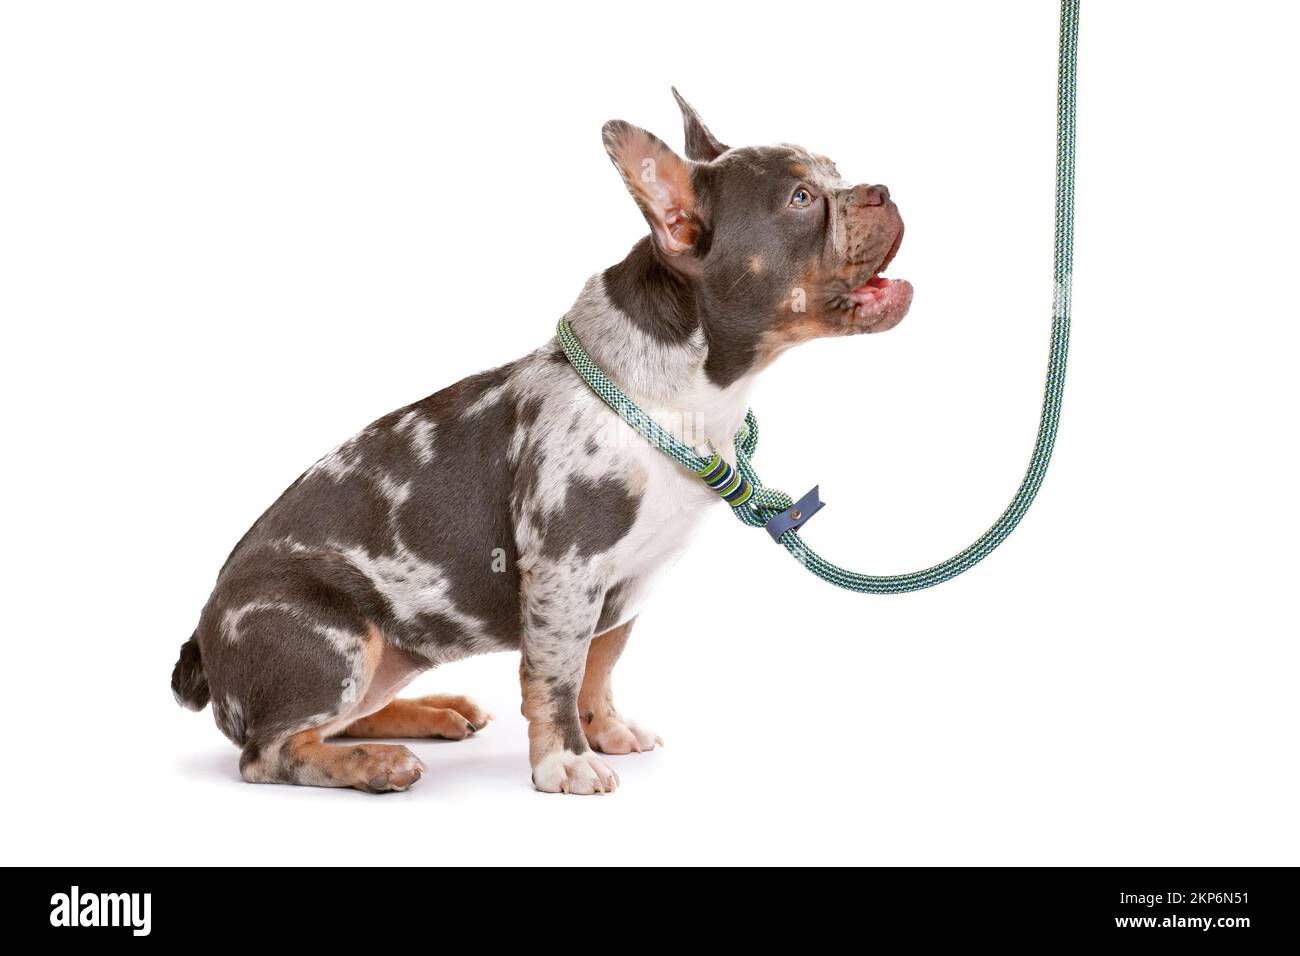 Merle tan French Bulldog dog wearing collar with rope retriever leash on white background Stock Photo